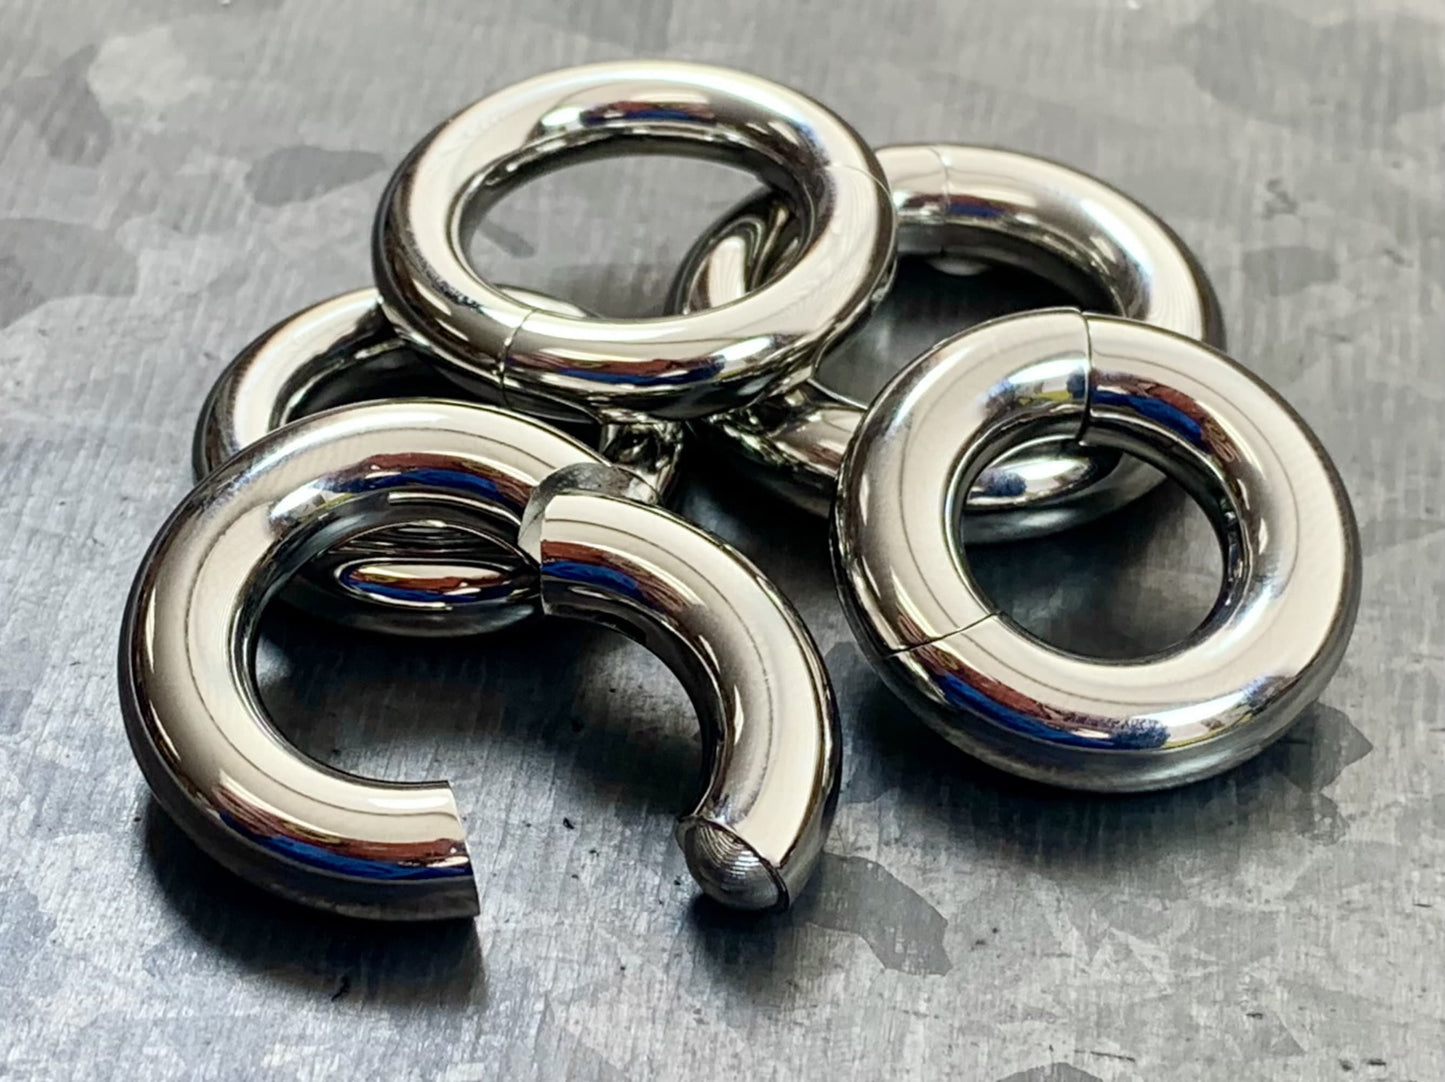 1 Piece Large Gauge Steel Hinged Segment Ring/Hoop - Easy and Secure Clickers - Gauges 8g (3.2mm) thru 2g (6mm) Available!